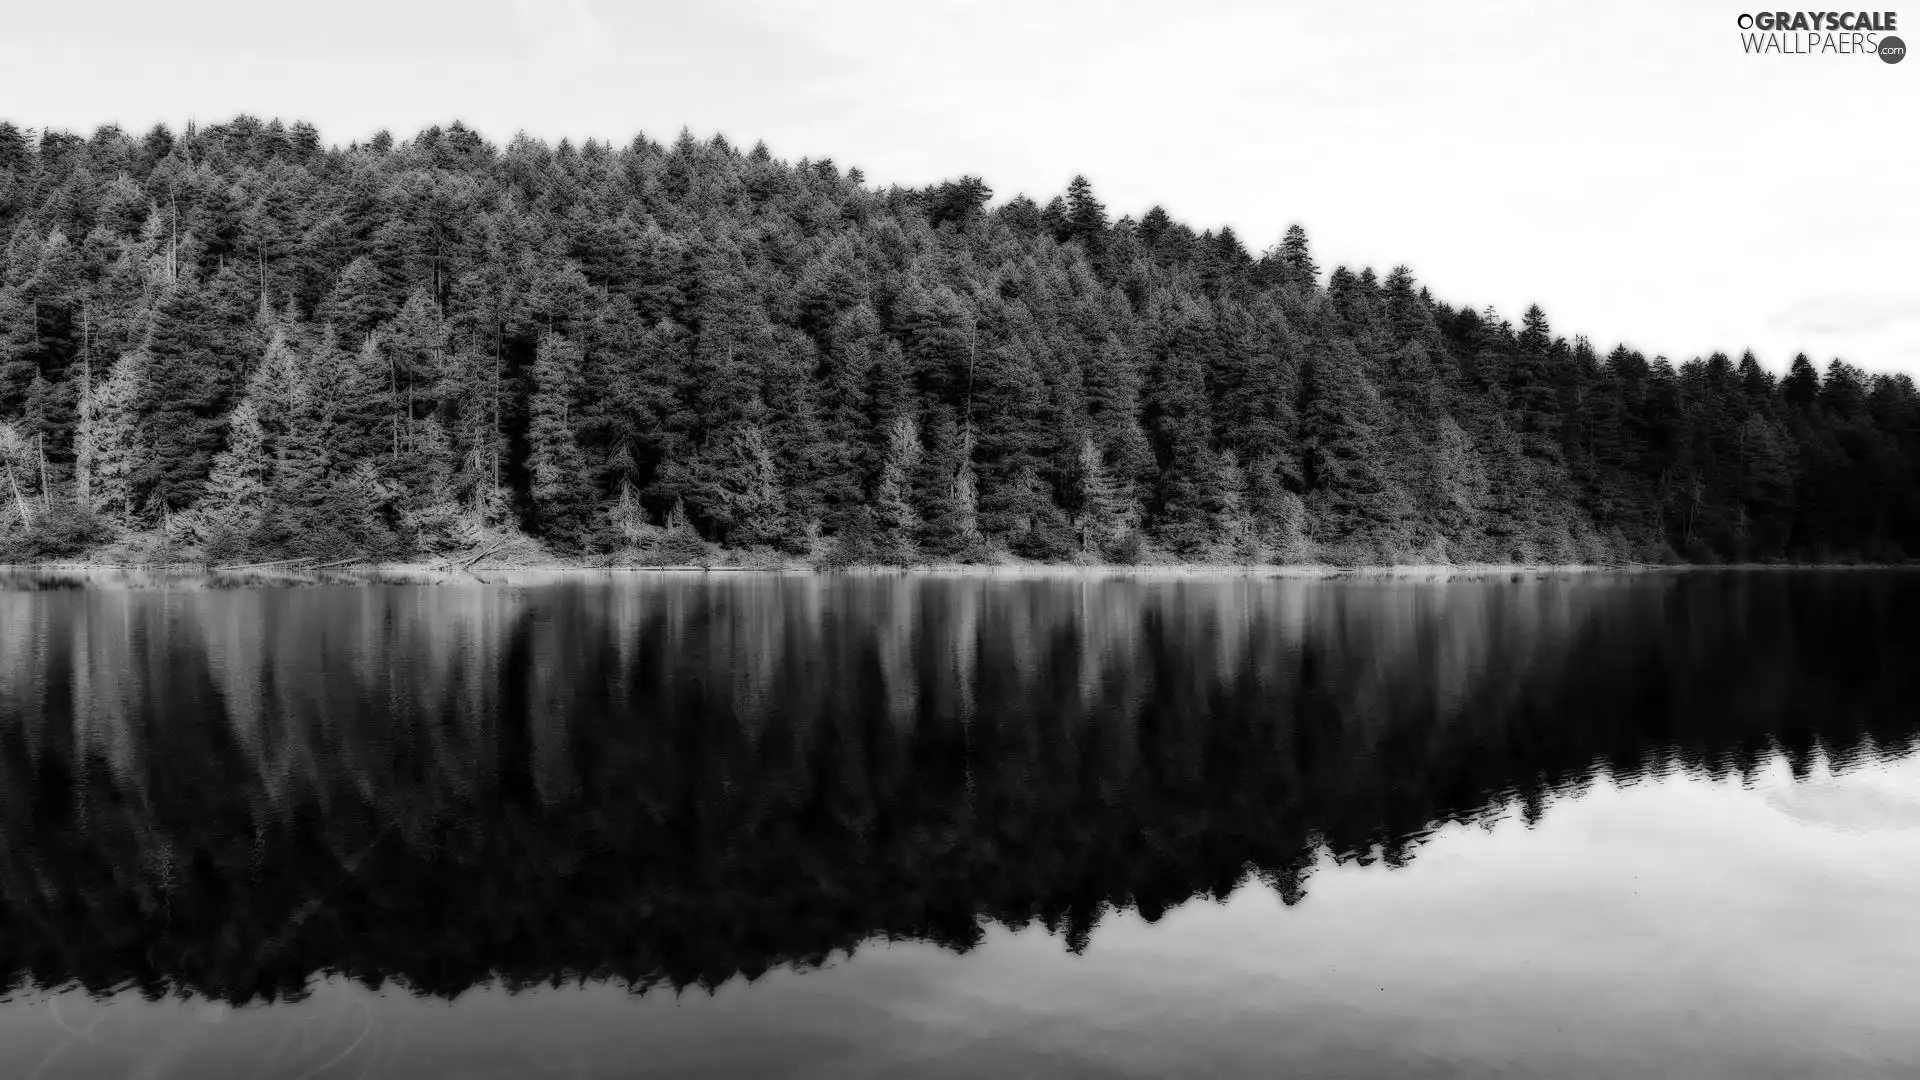 trees, viewes, Mirror, reflection, lake